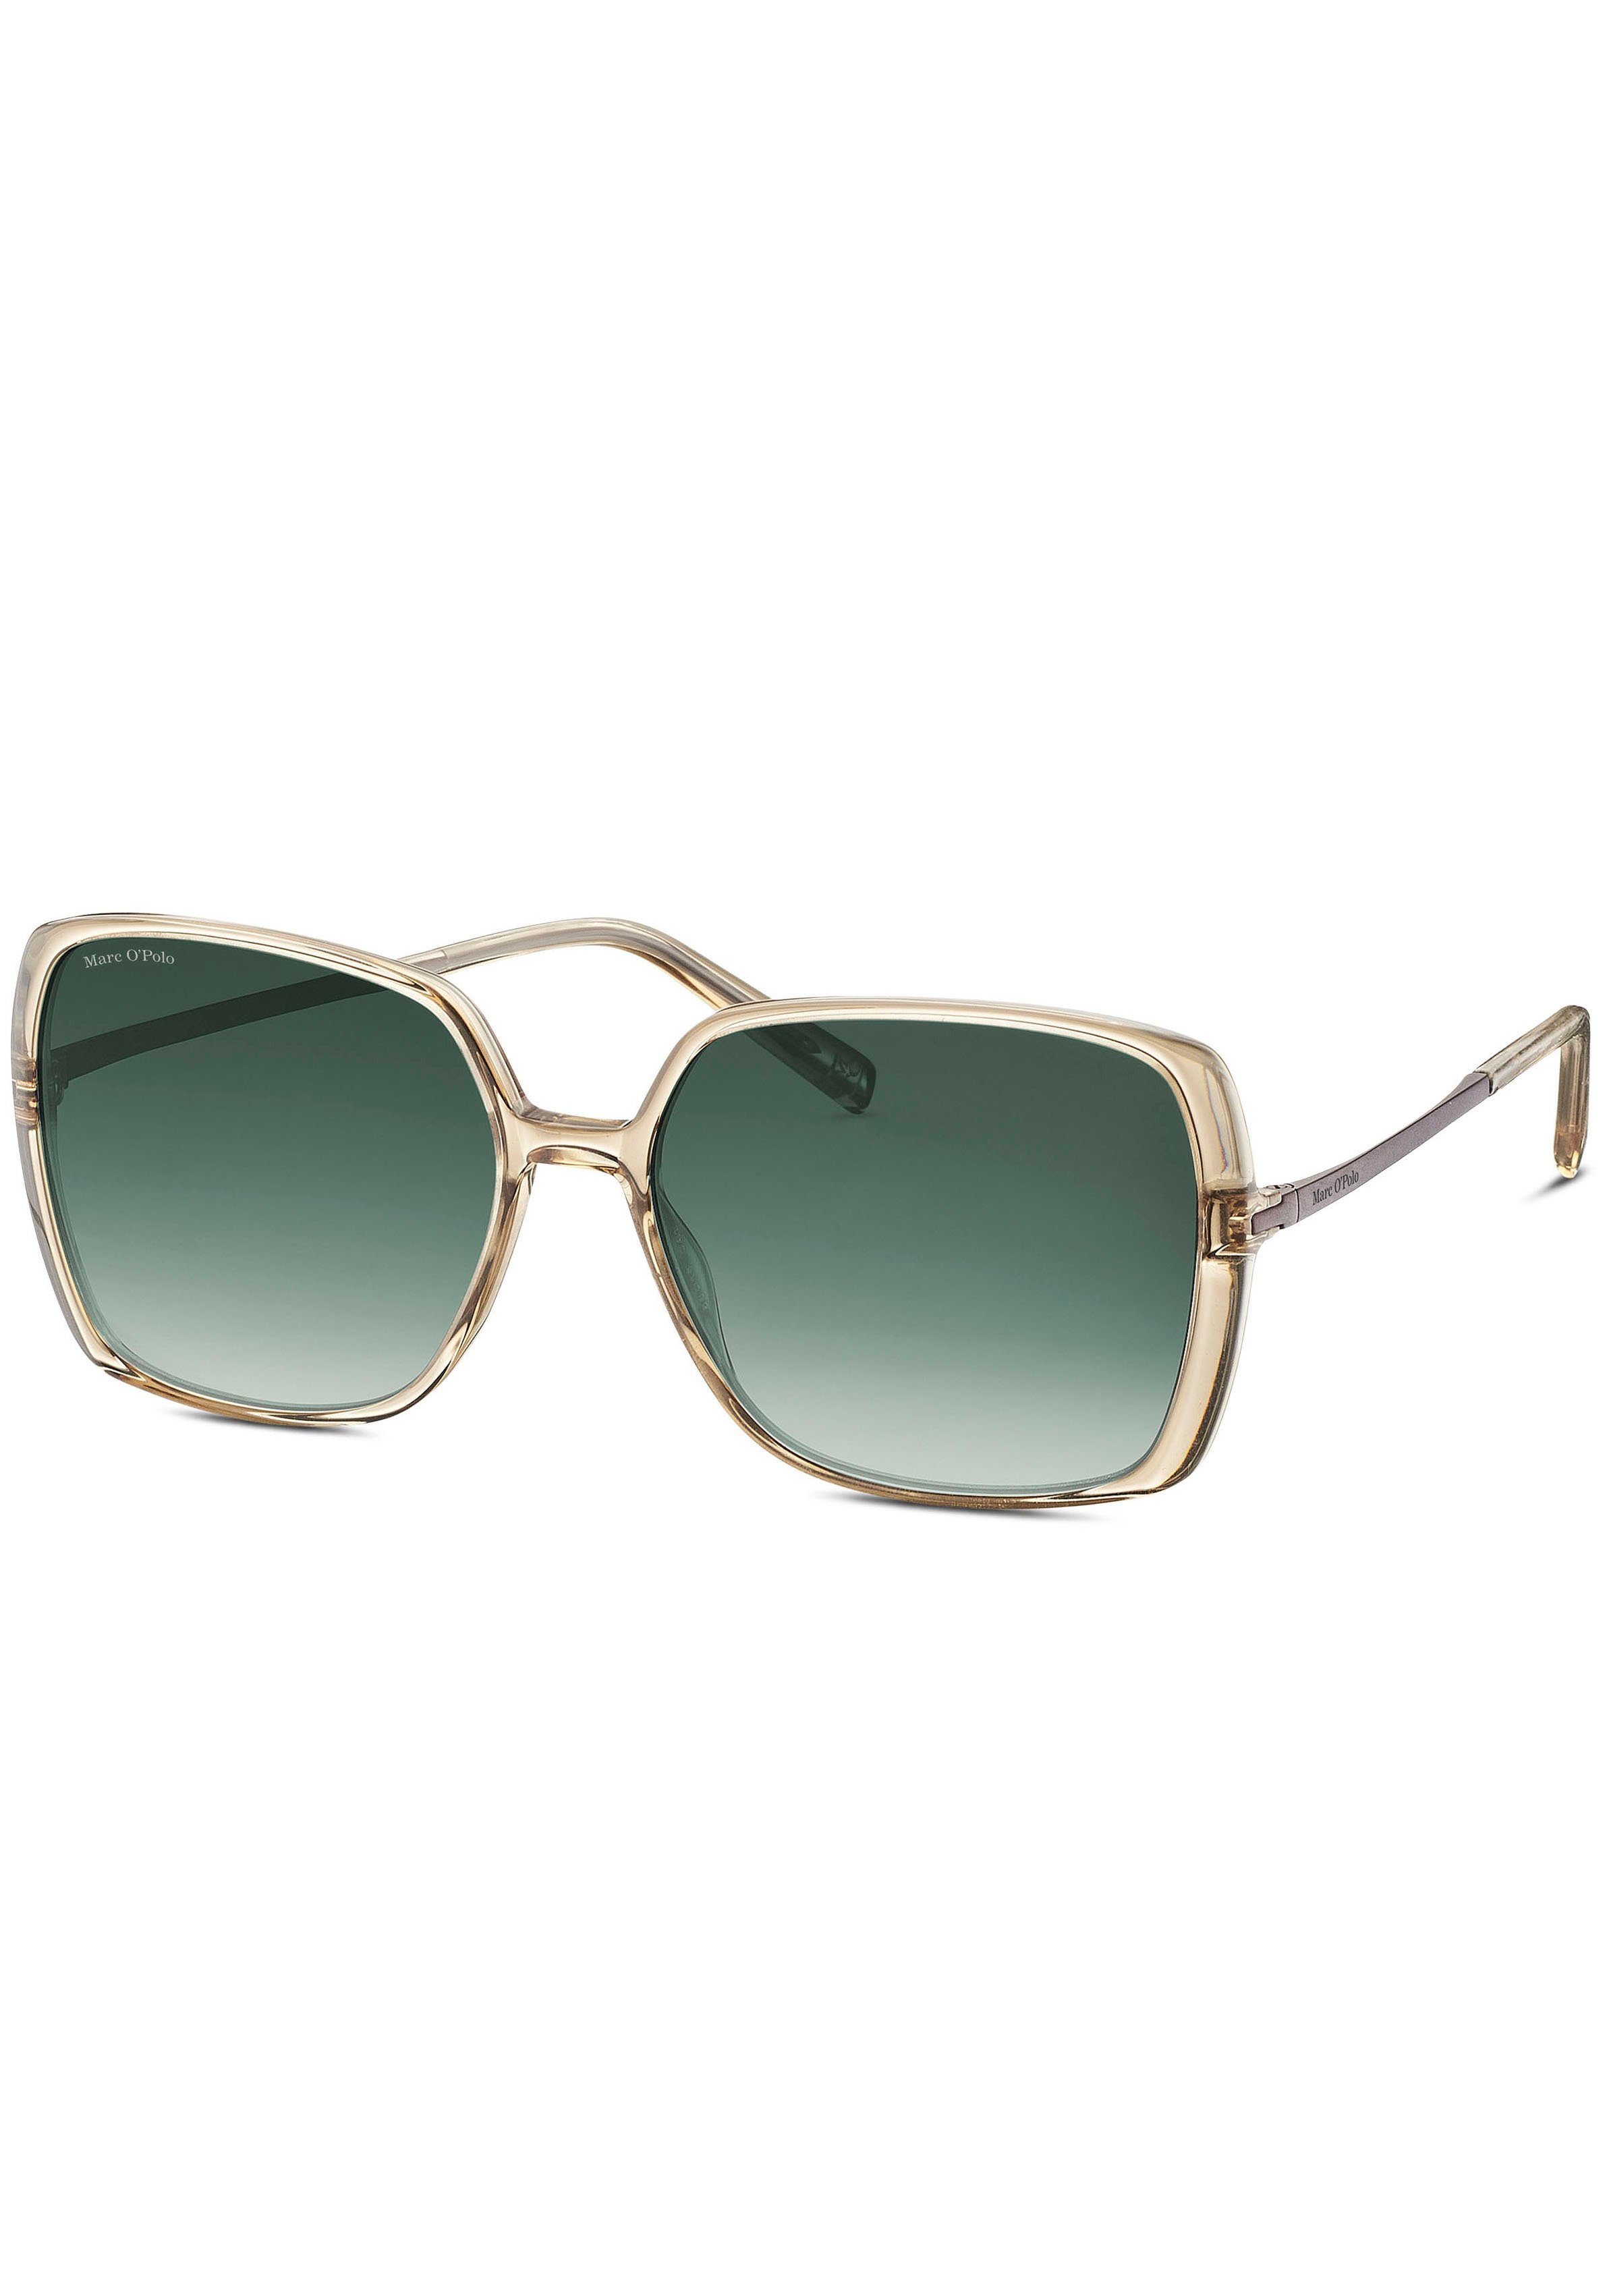 Marc O'Polo Sonnenbrille Modell 506190 Karree-From beige